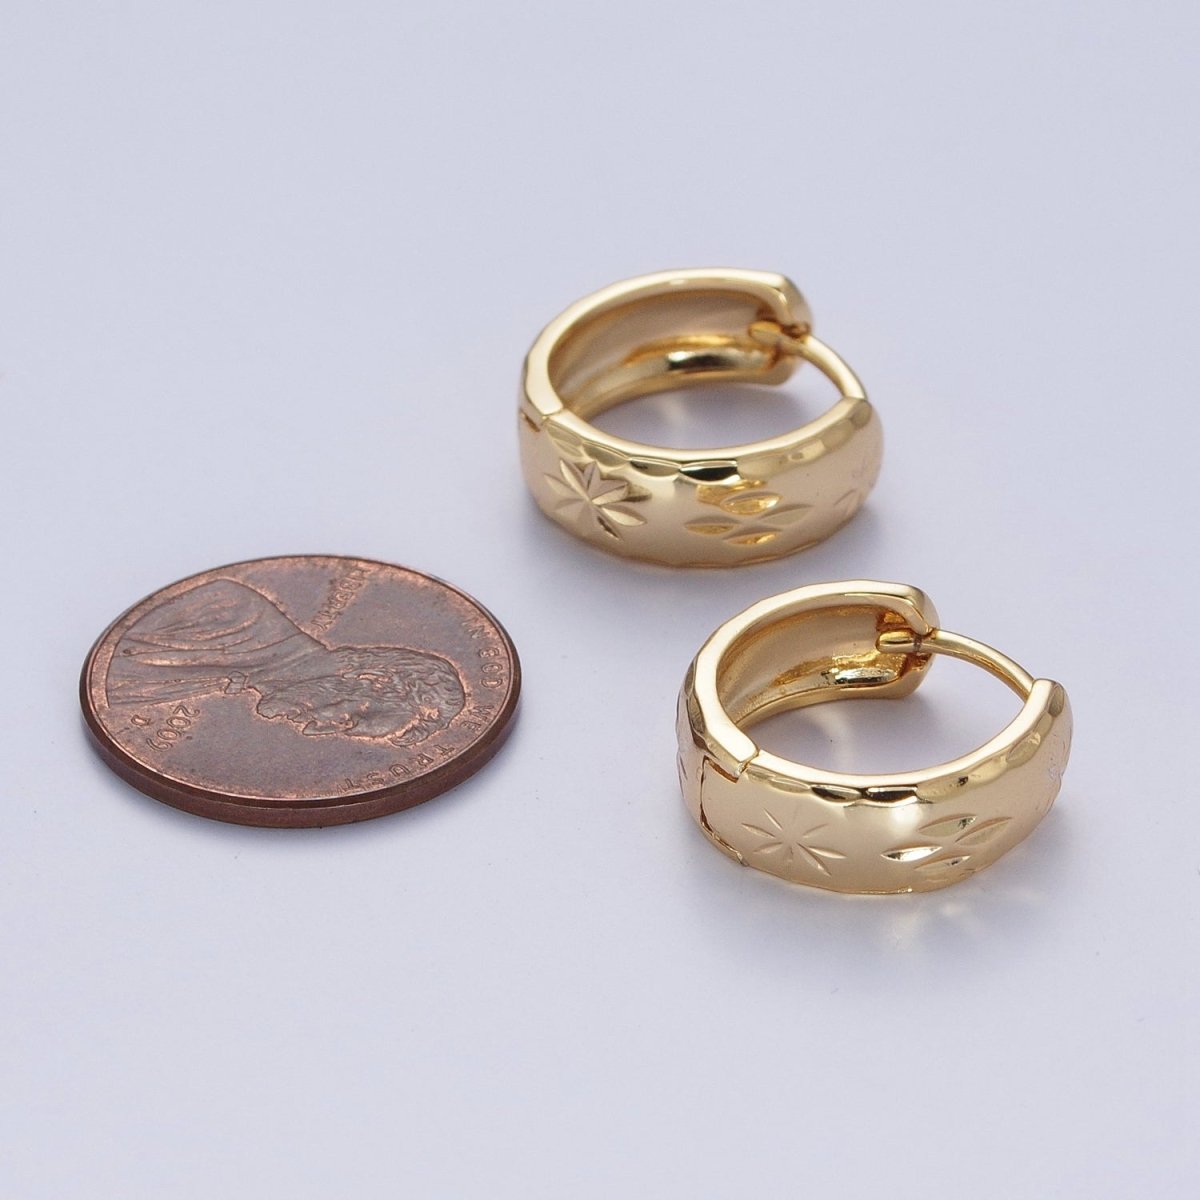 Gold Earrings with Textured North Star Carved Wide Small Huggie Hoop Earrings - X828 - DLUXCA